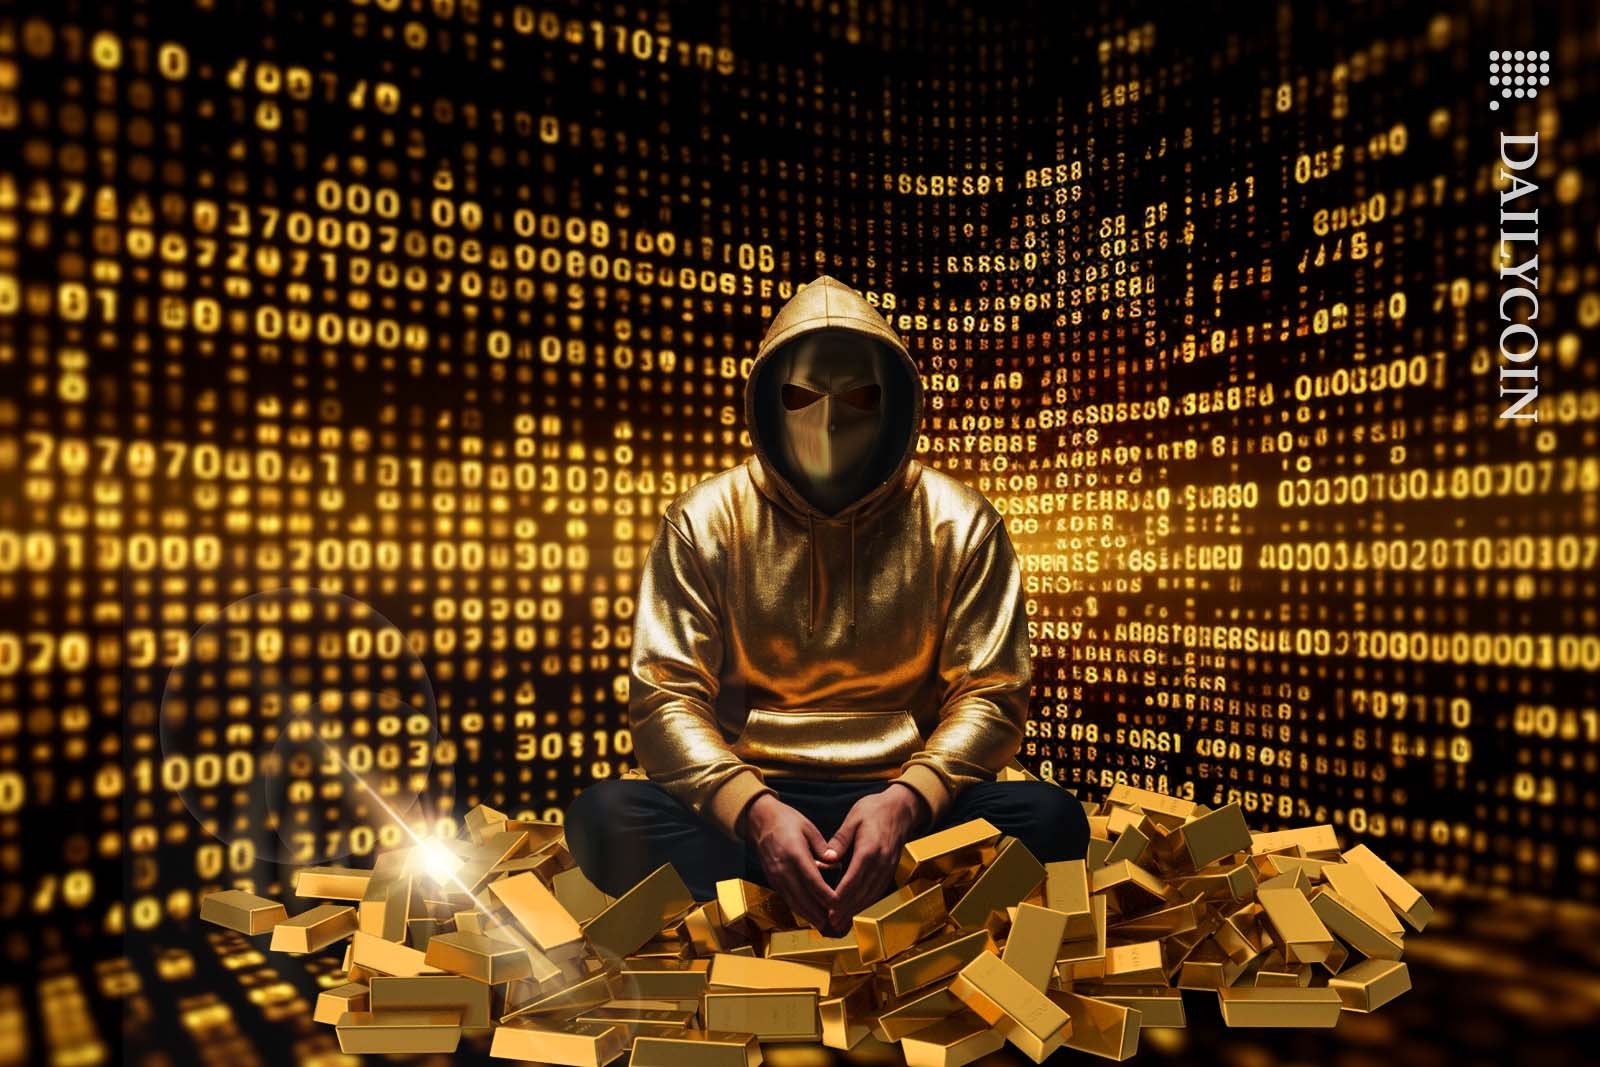 Hacker dressed in gold, sitting on a pile of gold in a digital room.